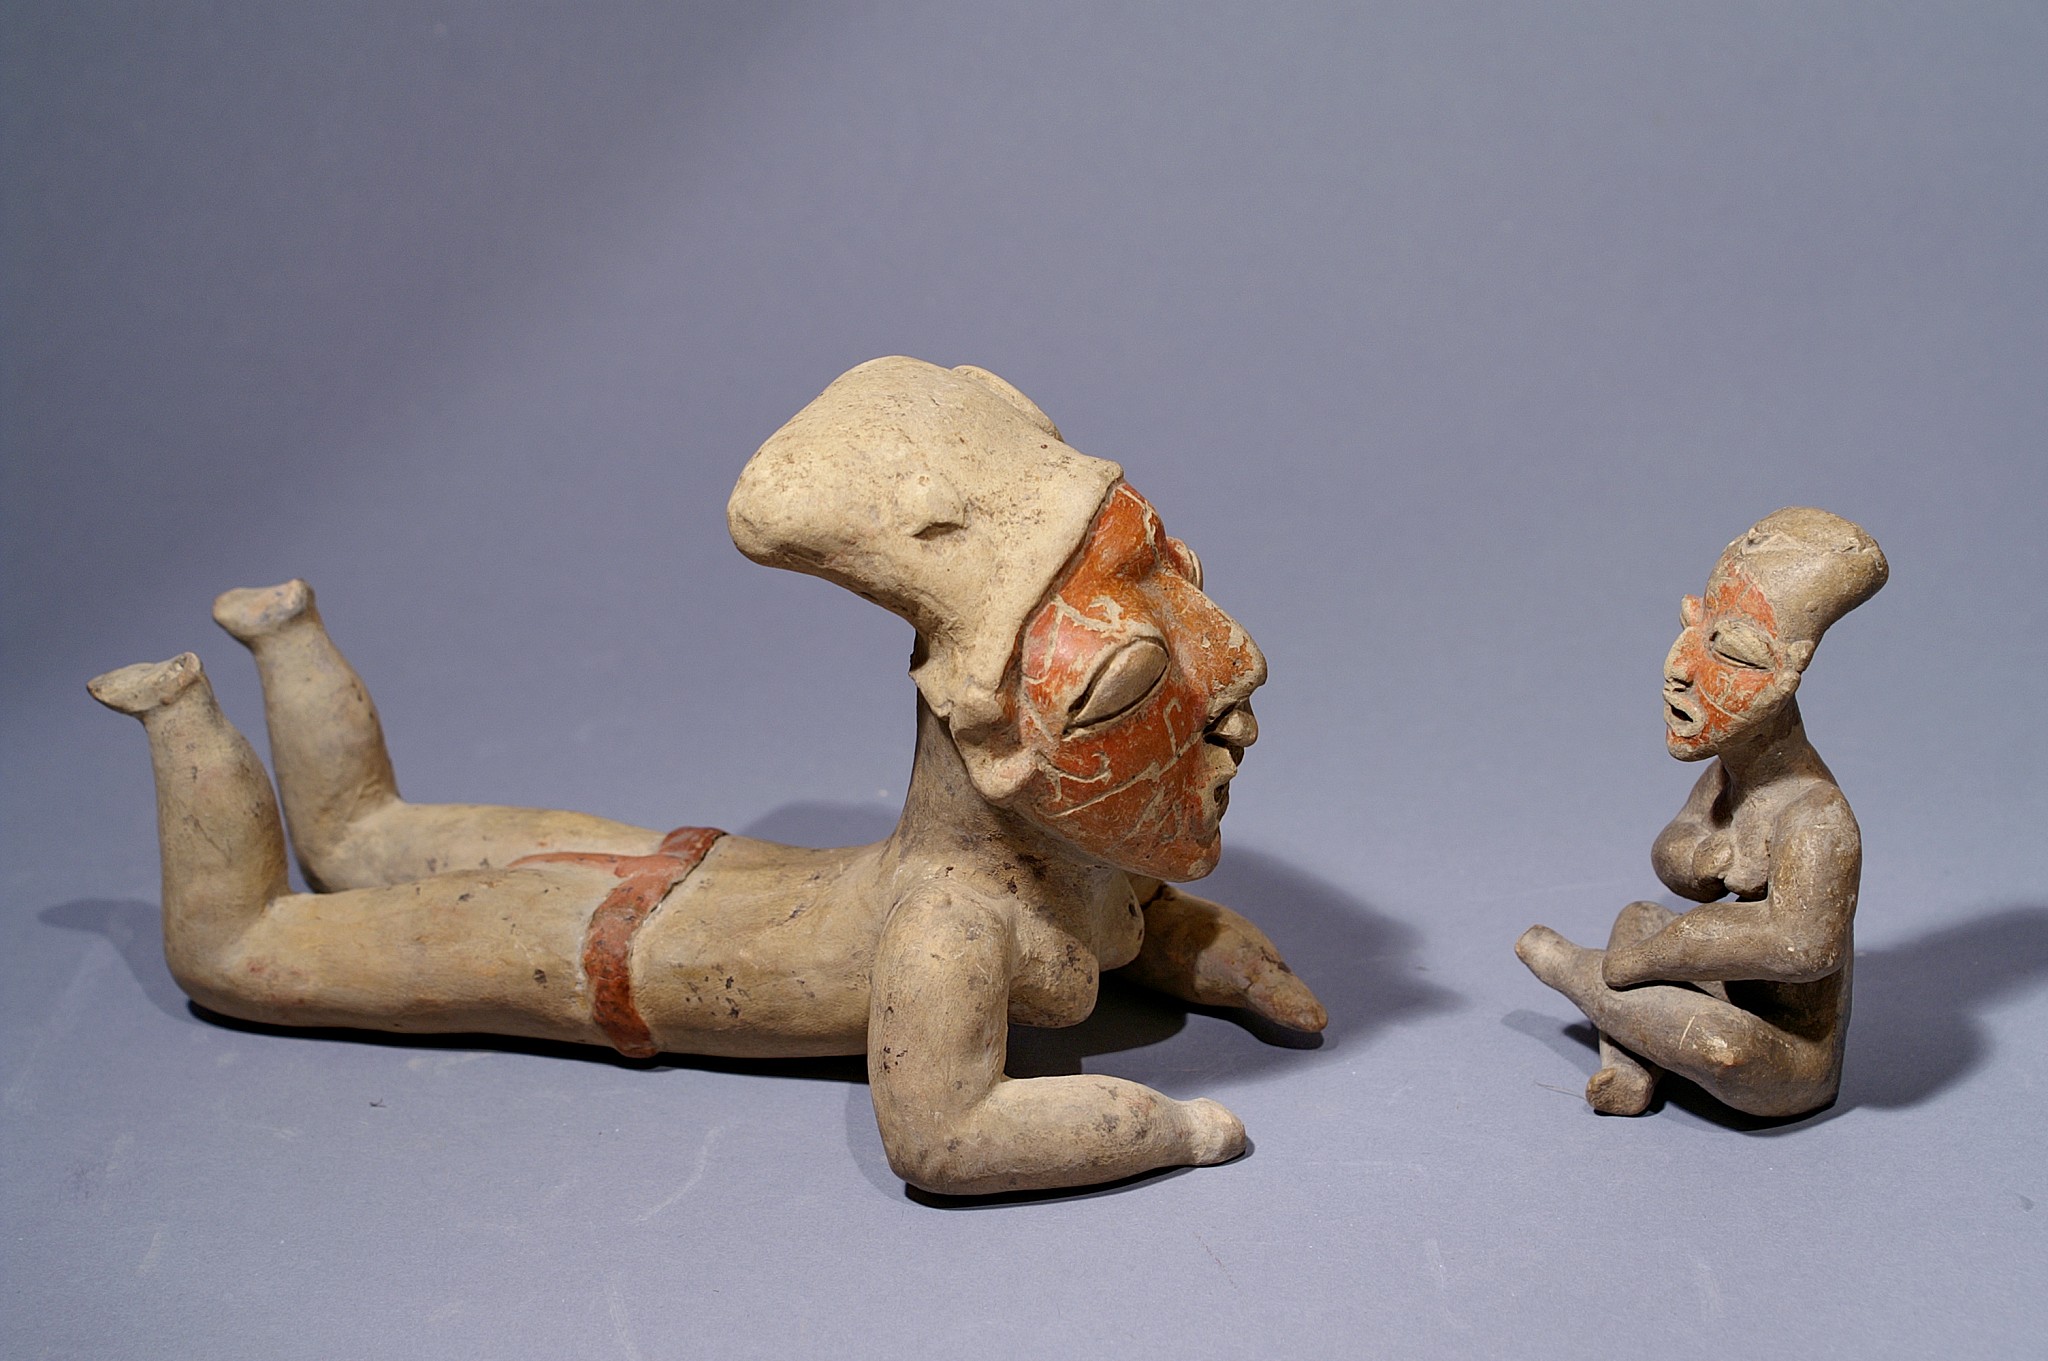 Ecuador, Guangala Pair of Female Figures, one lying down and one seated with hand to breast
The prone position of the larger female may have been borrowed from the neighboring Jamacoaque, but the facial incisions are typical of Guangala figures. The smaller seated female is similarly marked with carved  facial designs. Guangala ceramics are unique in the northern coast for incising such markings on pottery figurines.
Media: Ceramic
Dimensions: Height: 7 3/4" lying down, 3 3/4" seated
$12,000
M7089